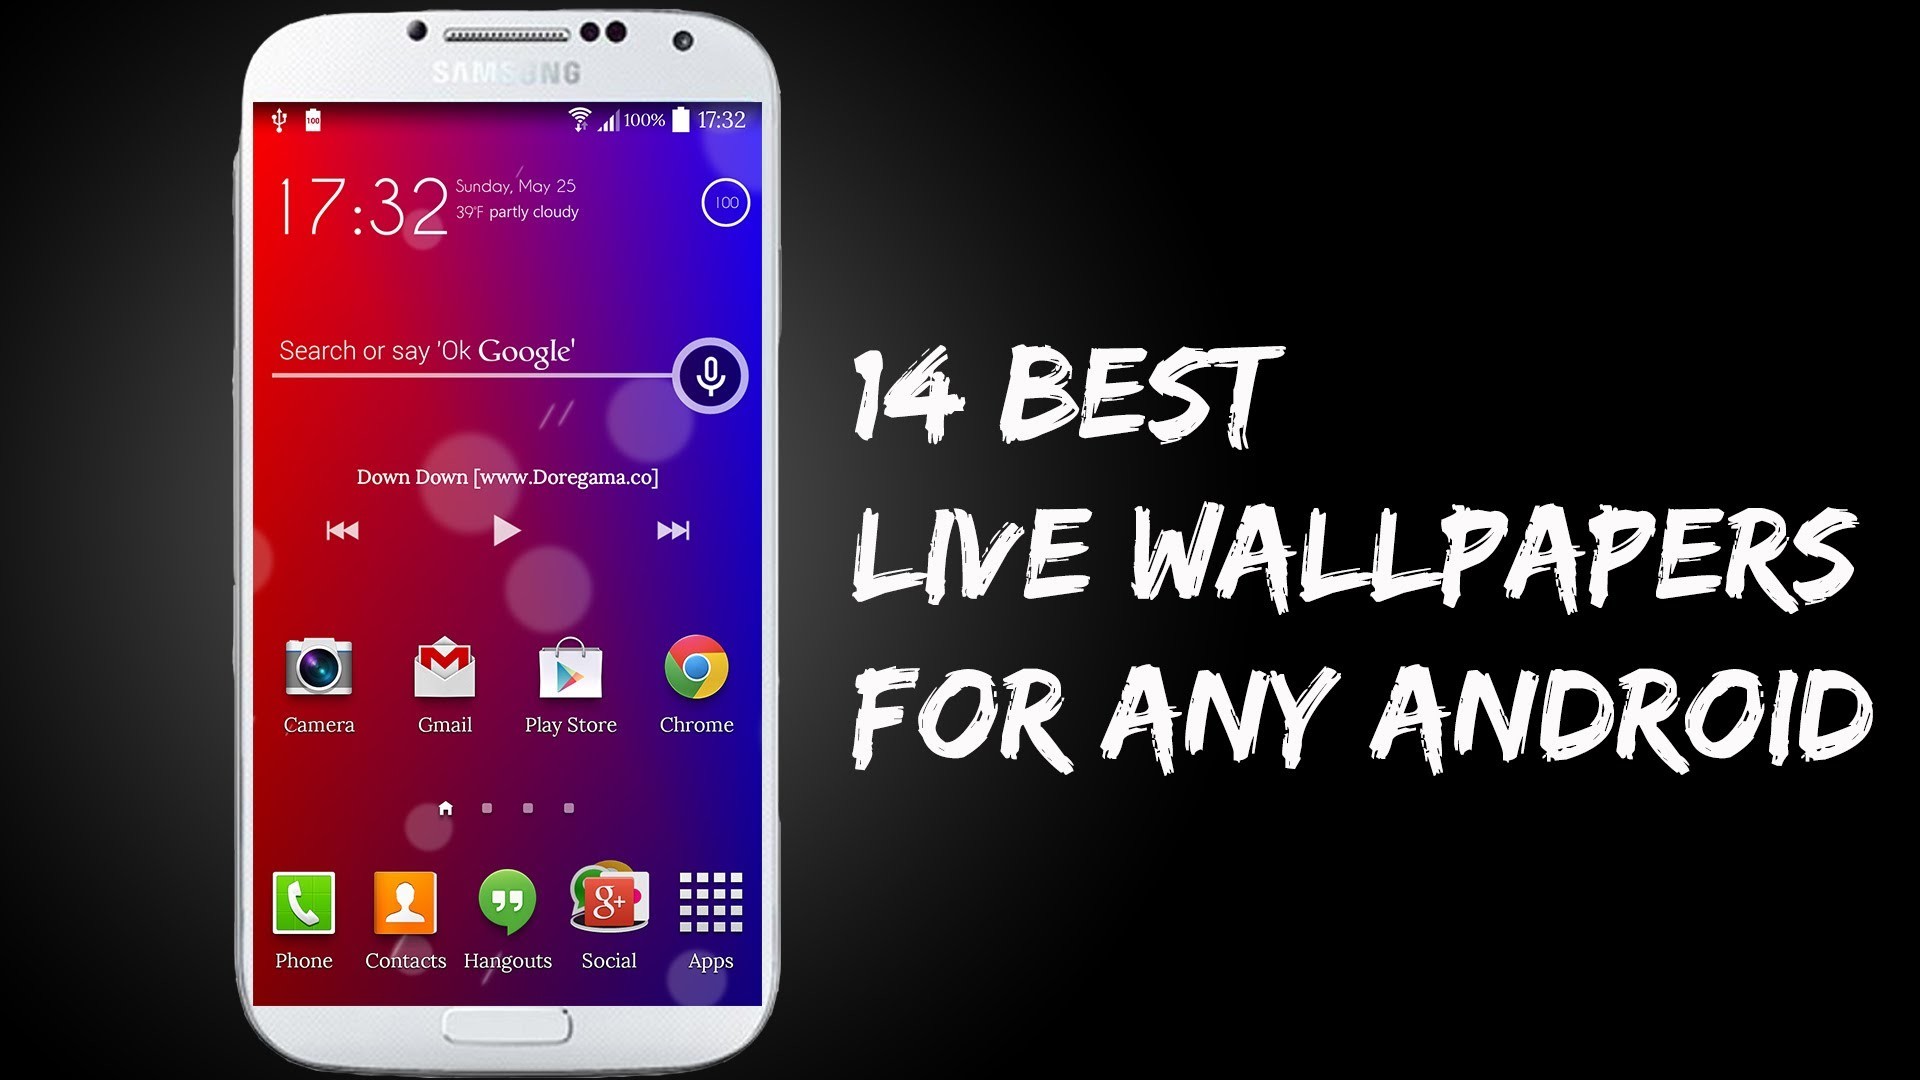 samsung galaxy s5 live wallpaper,mobile phone,gadget,smartphone,communication device,portable communications device